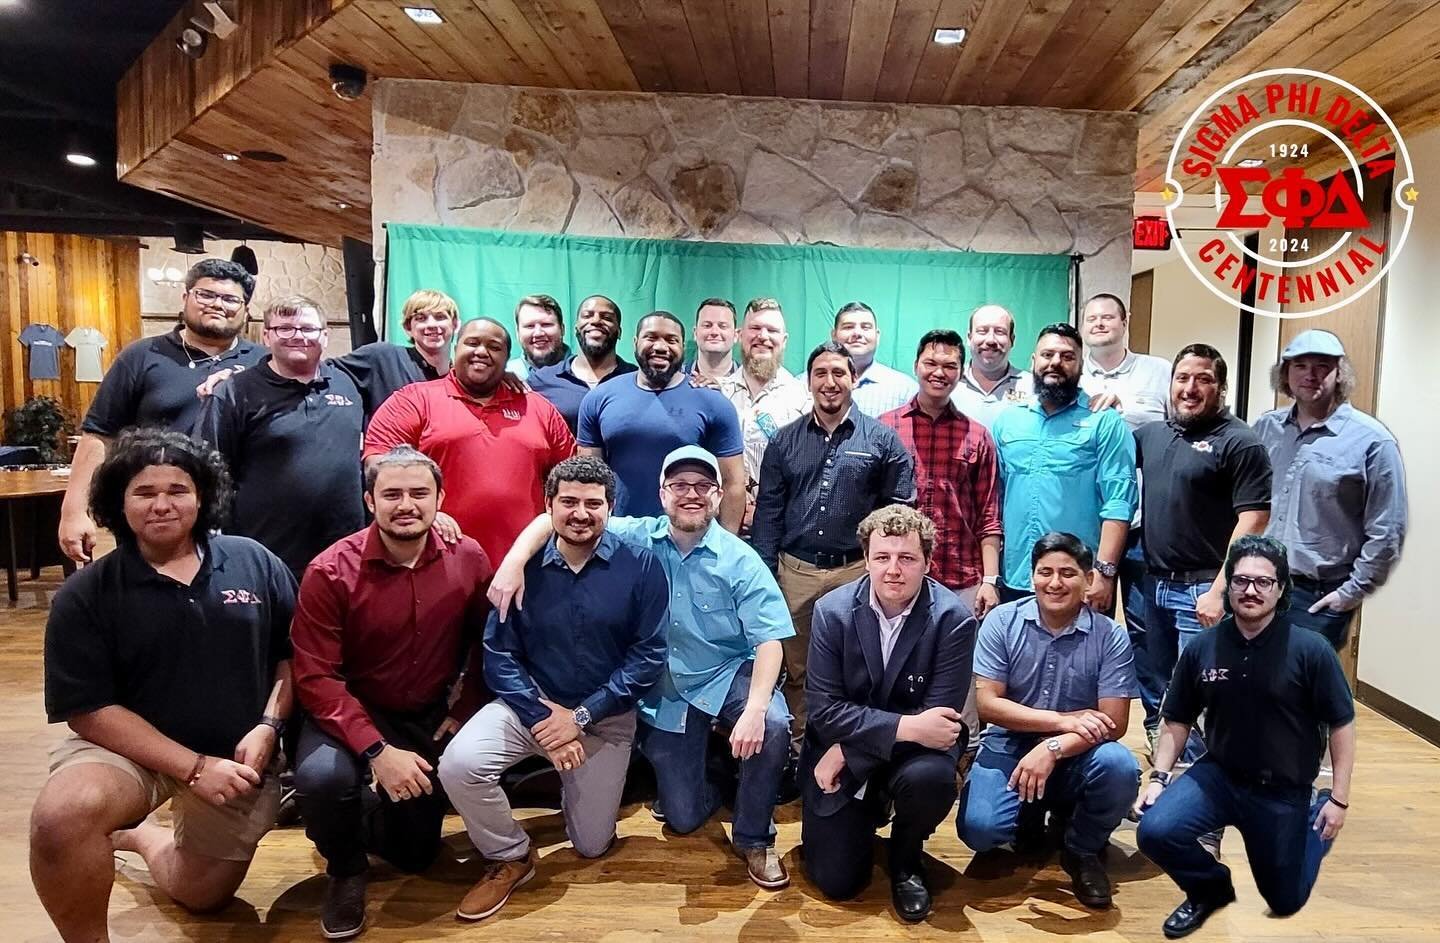 This past June, Beta-Gamma Chapter celebrated their 20 year anniversary with actives and alumni coming together to celebrate the occasion.